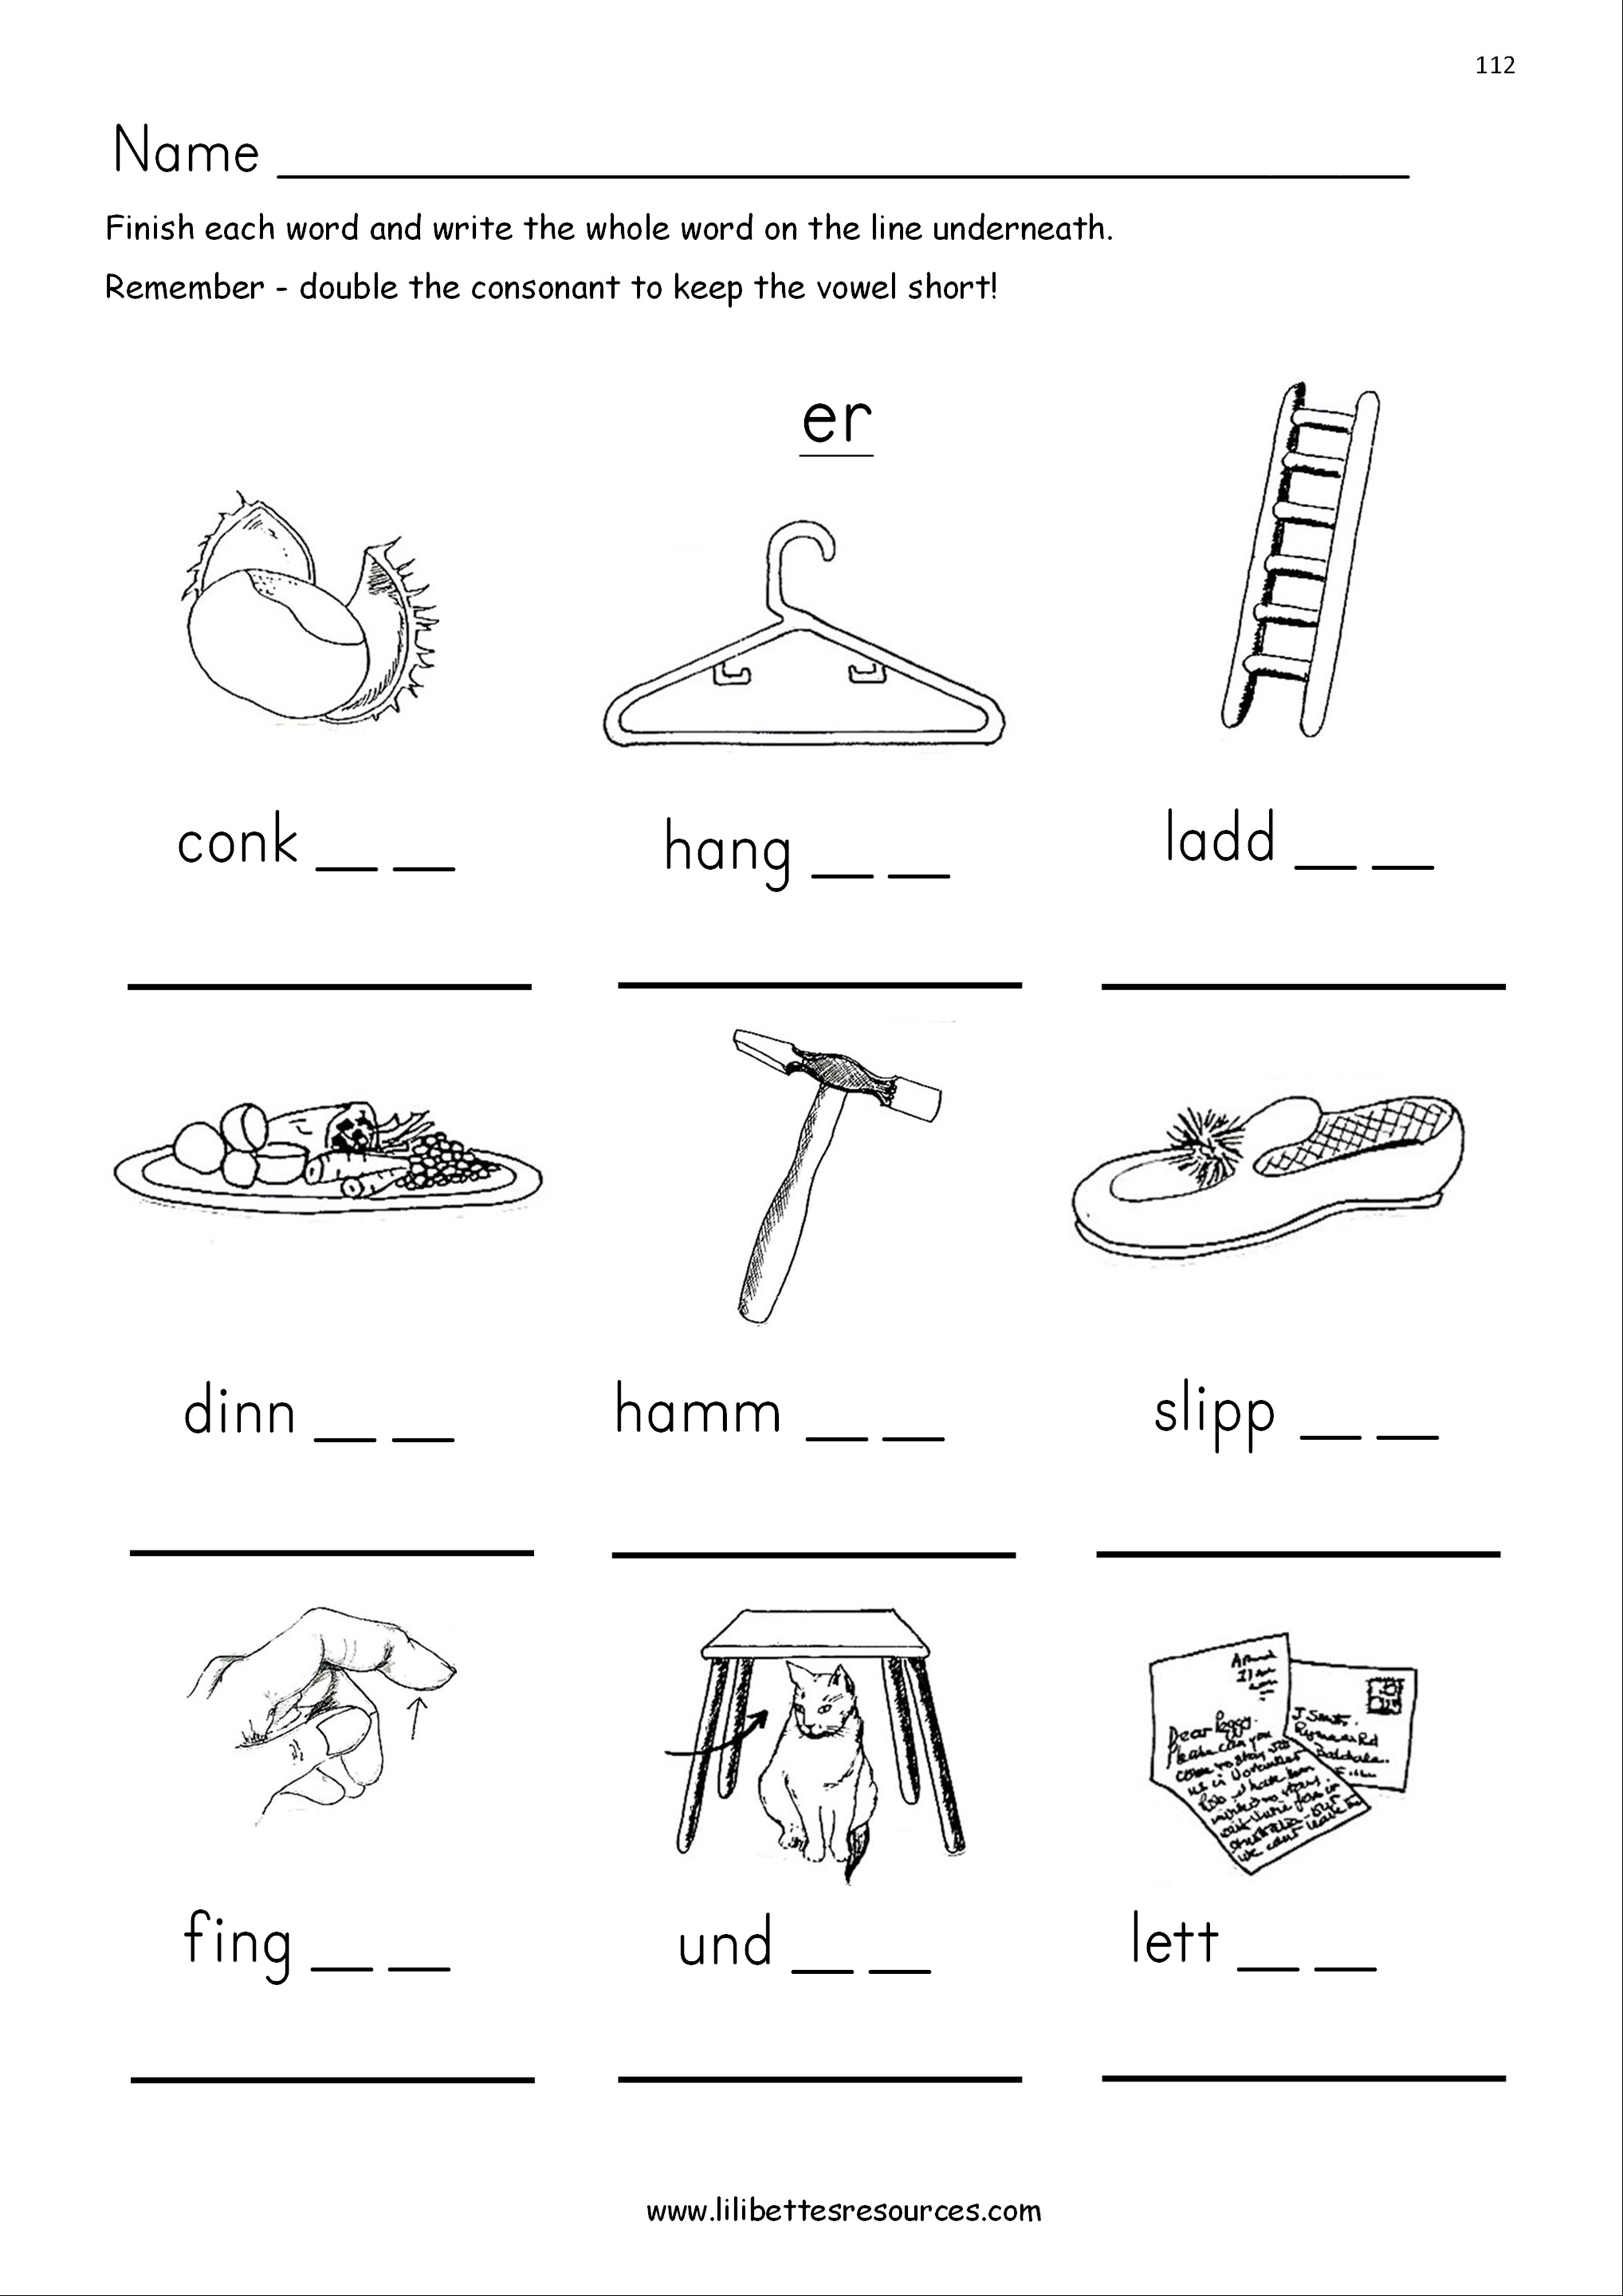 Free Printable Worksheets For Er Verbs In Spanish